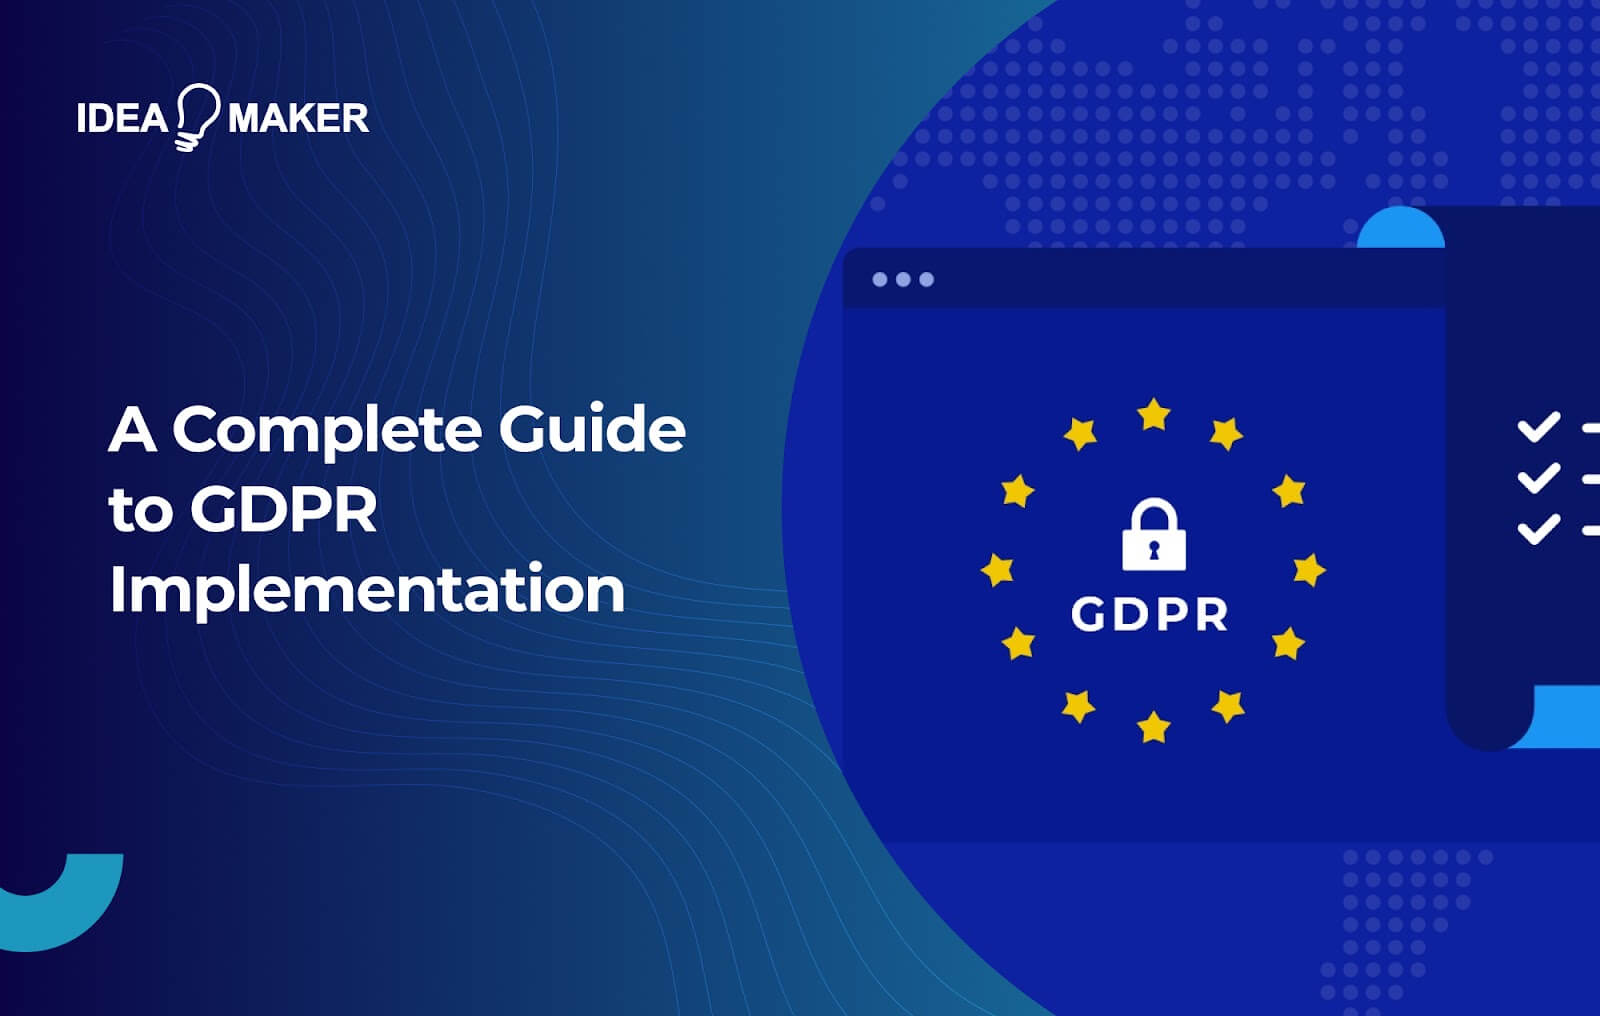 A Complete Guide to GDPR Implementation (with Checklist)